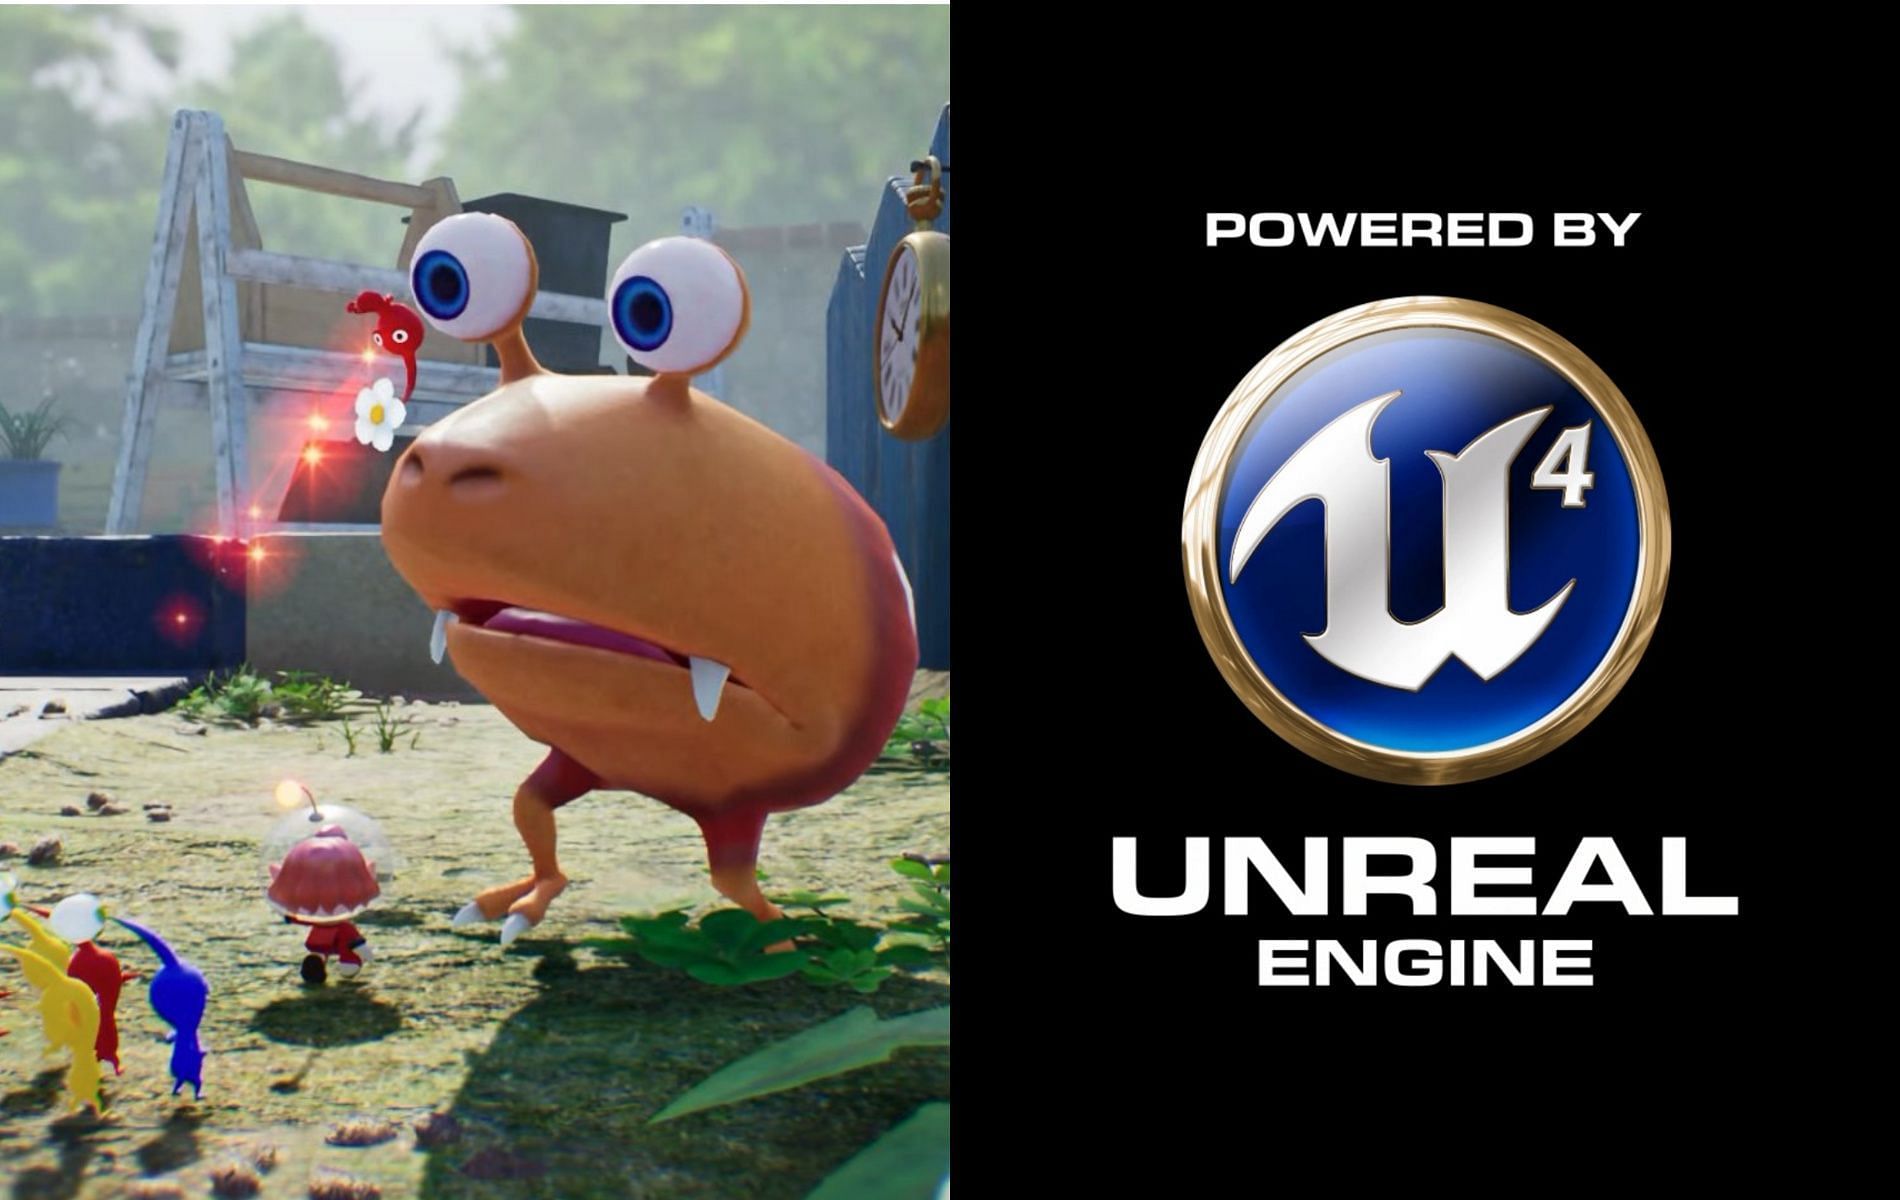 Does Pikmin 4 run on Unreal Engine?